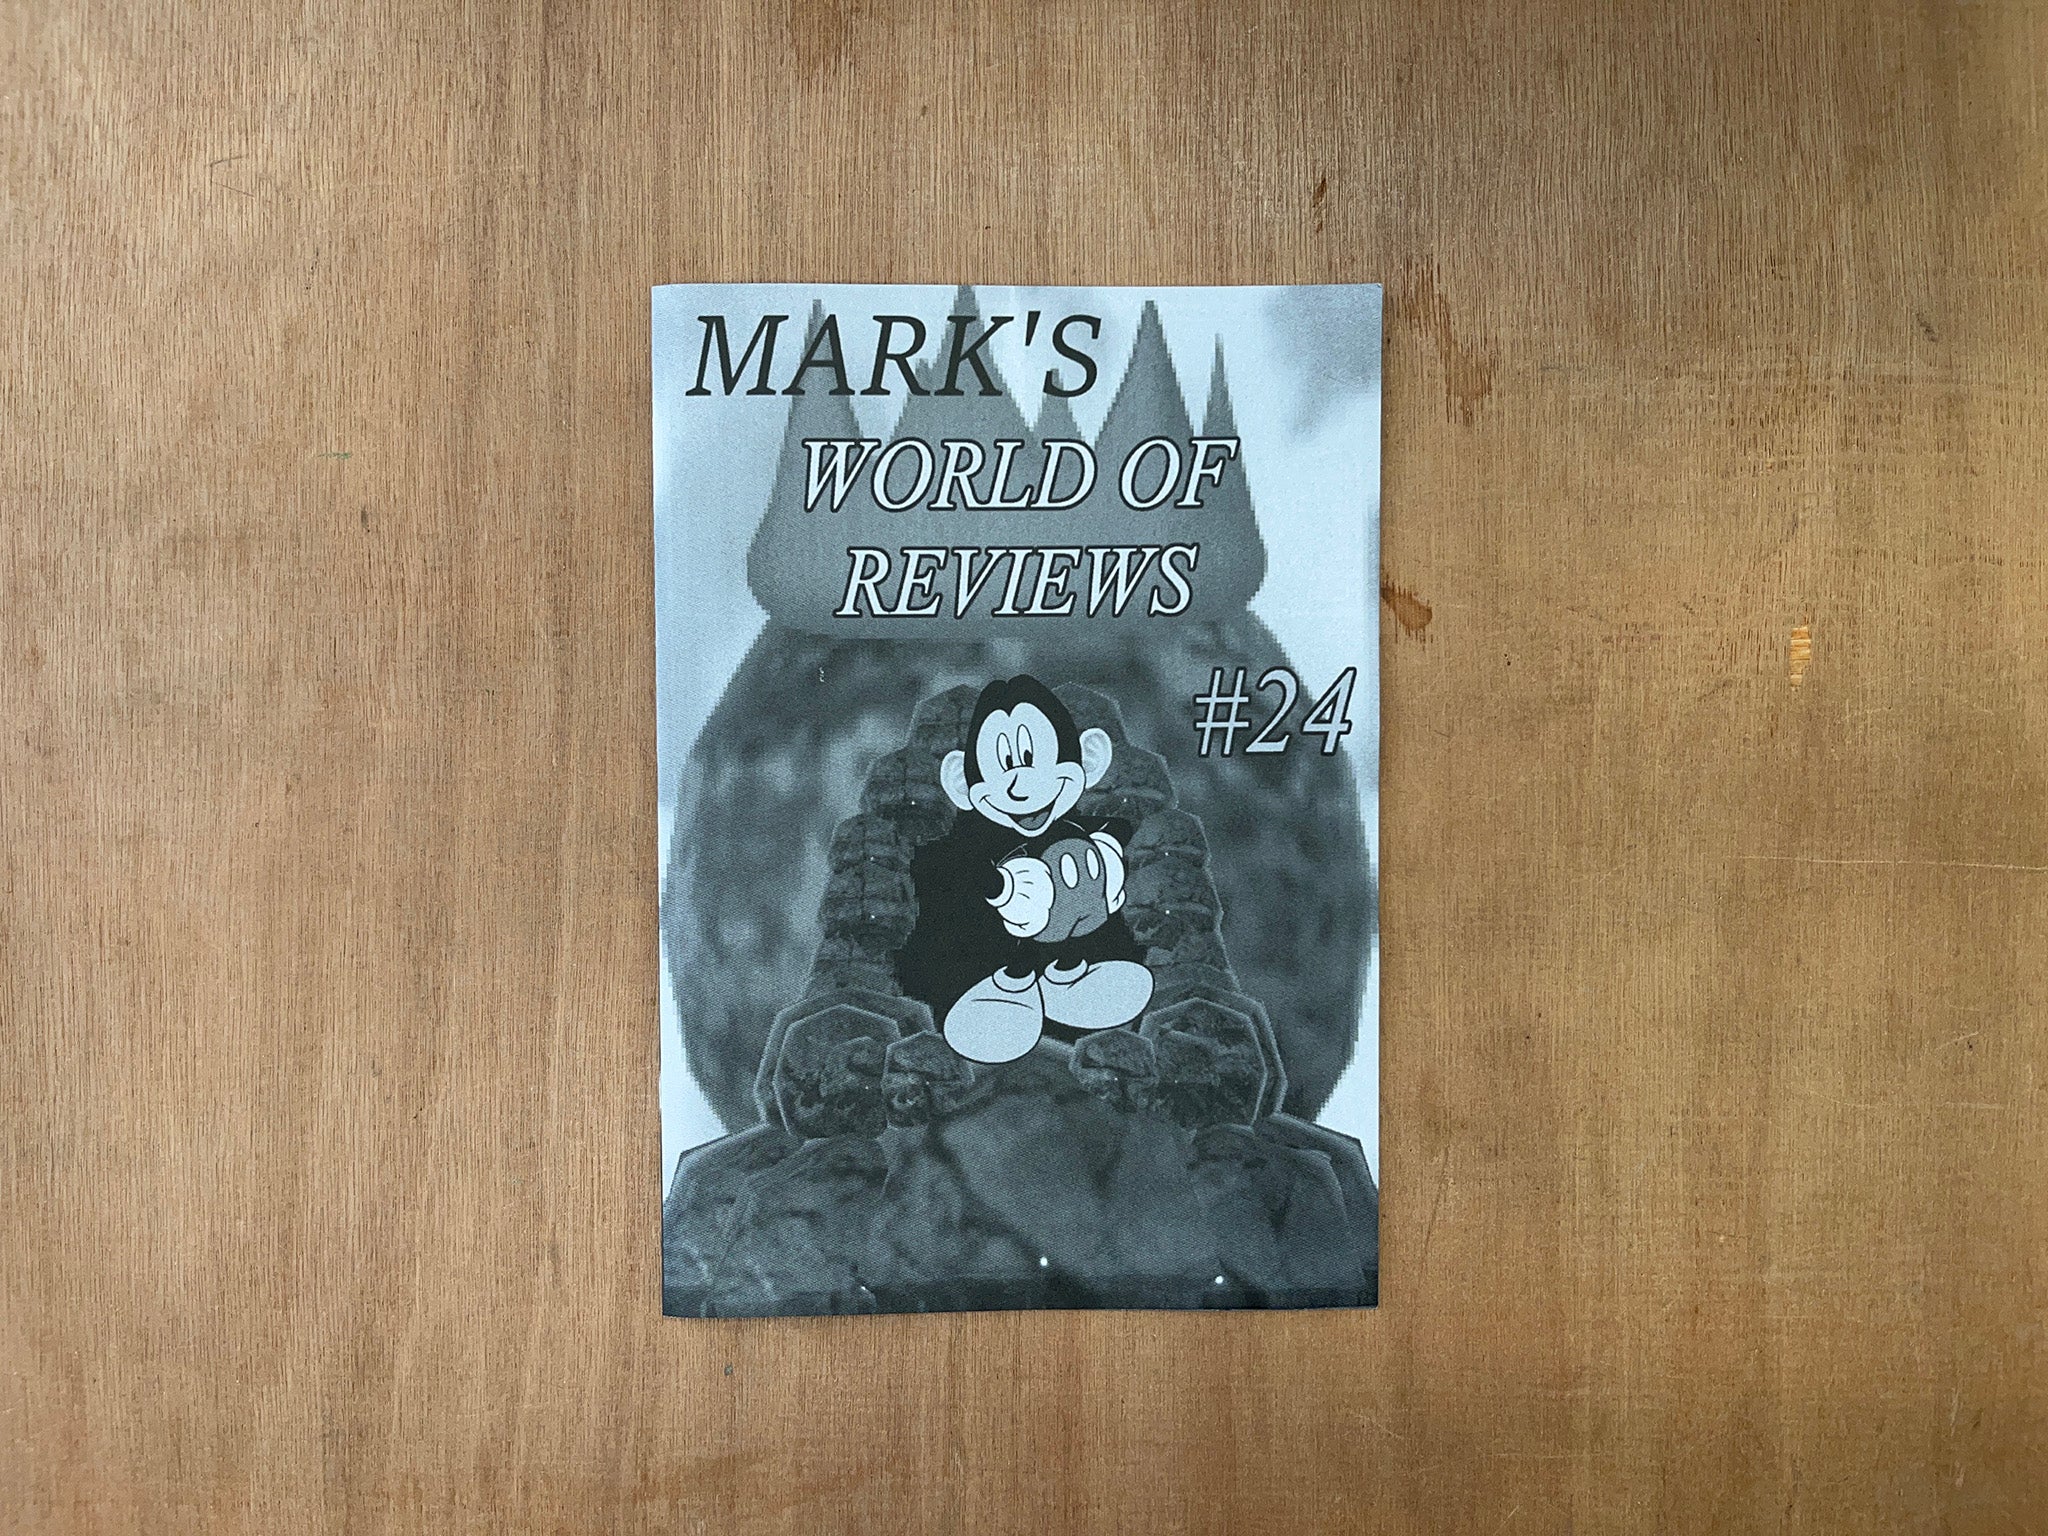 MARK'S WORLD OF REVIEWS #24 by MARK